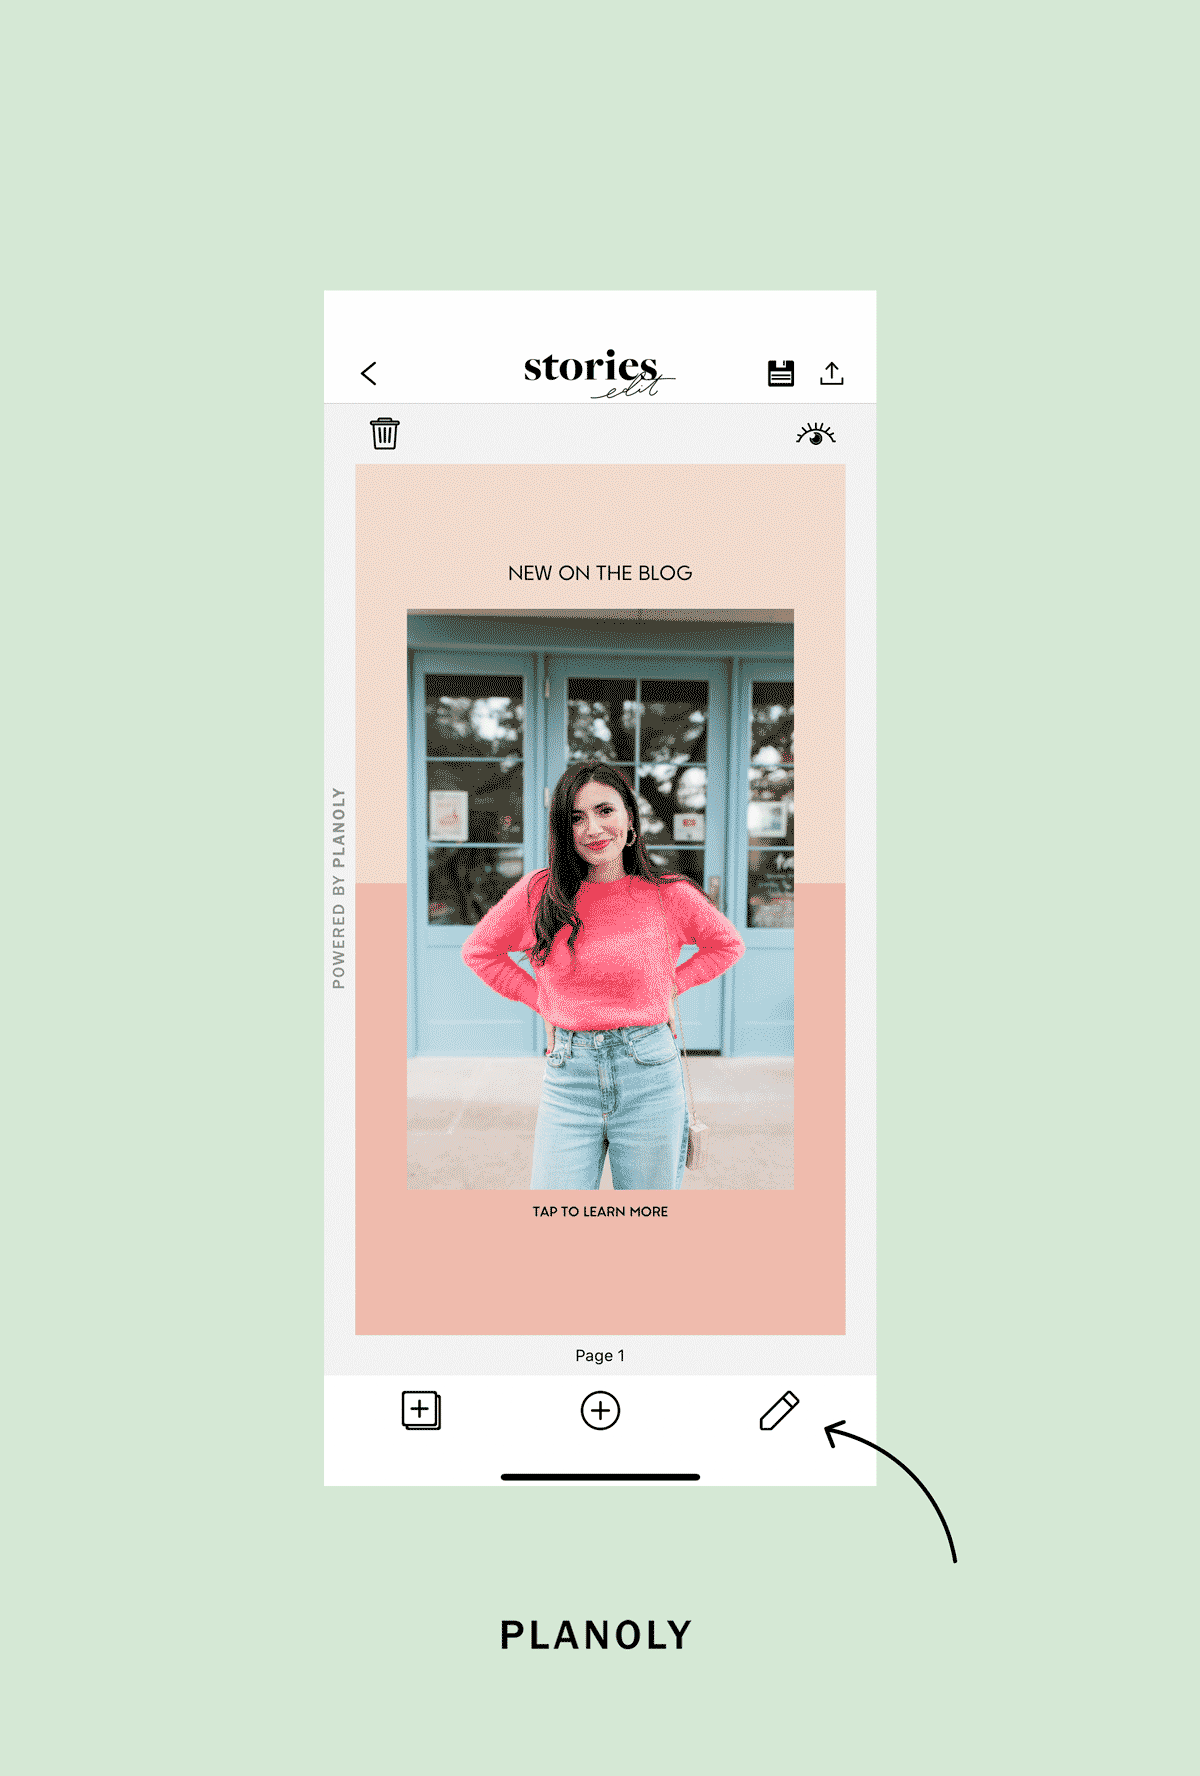 PLANOLY-Blog-Post-How-to-Use-the-Resizing,-Rotation,-and-Stickers-Features-on-StoriesEdit-Image-3-1-1